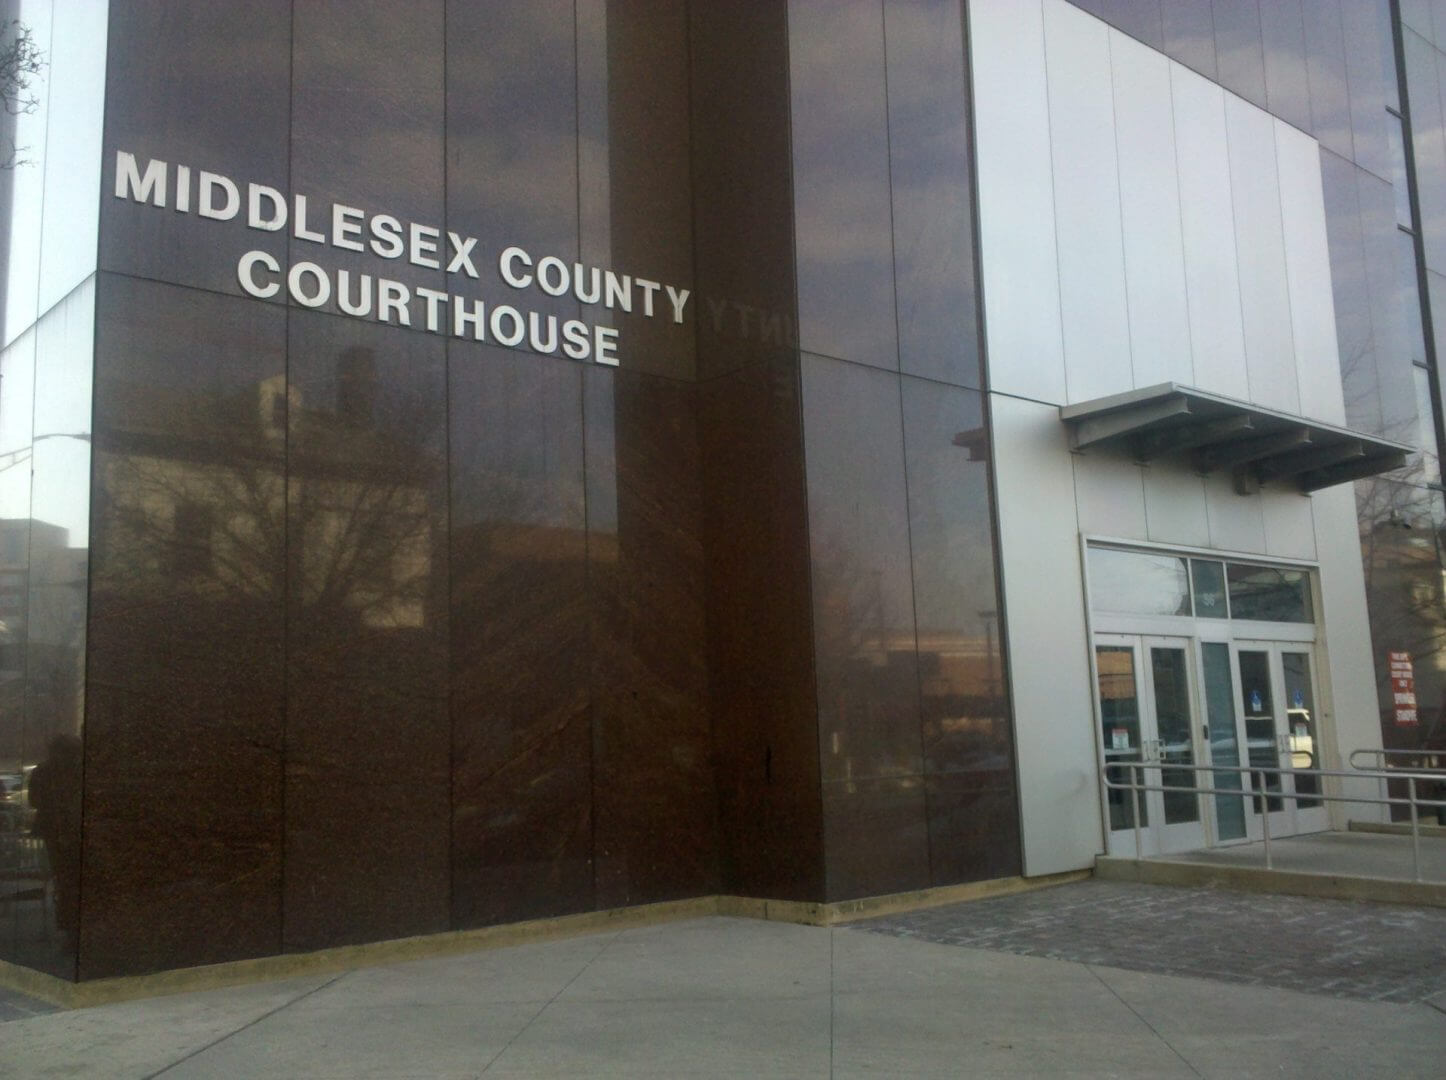 Press freedom before the Superior Court of Middlesex County and Office of NJ AG